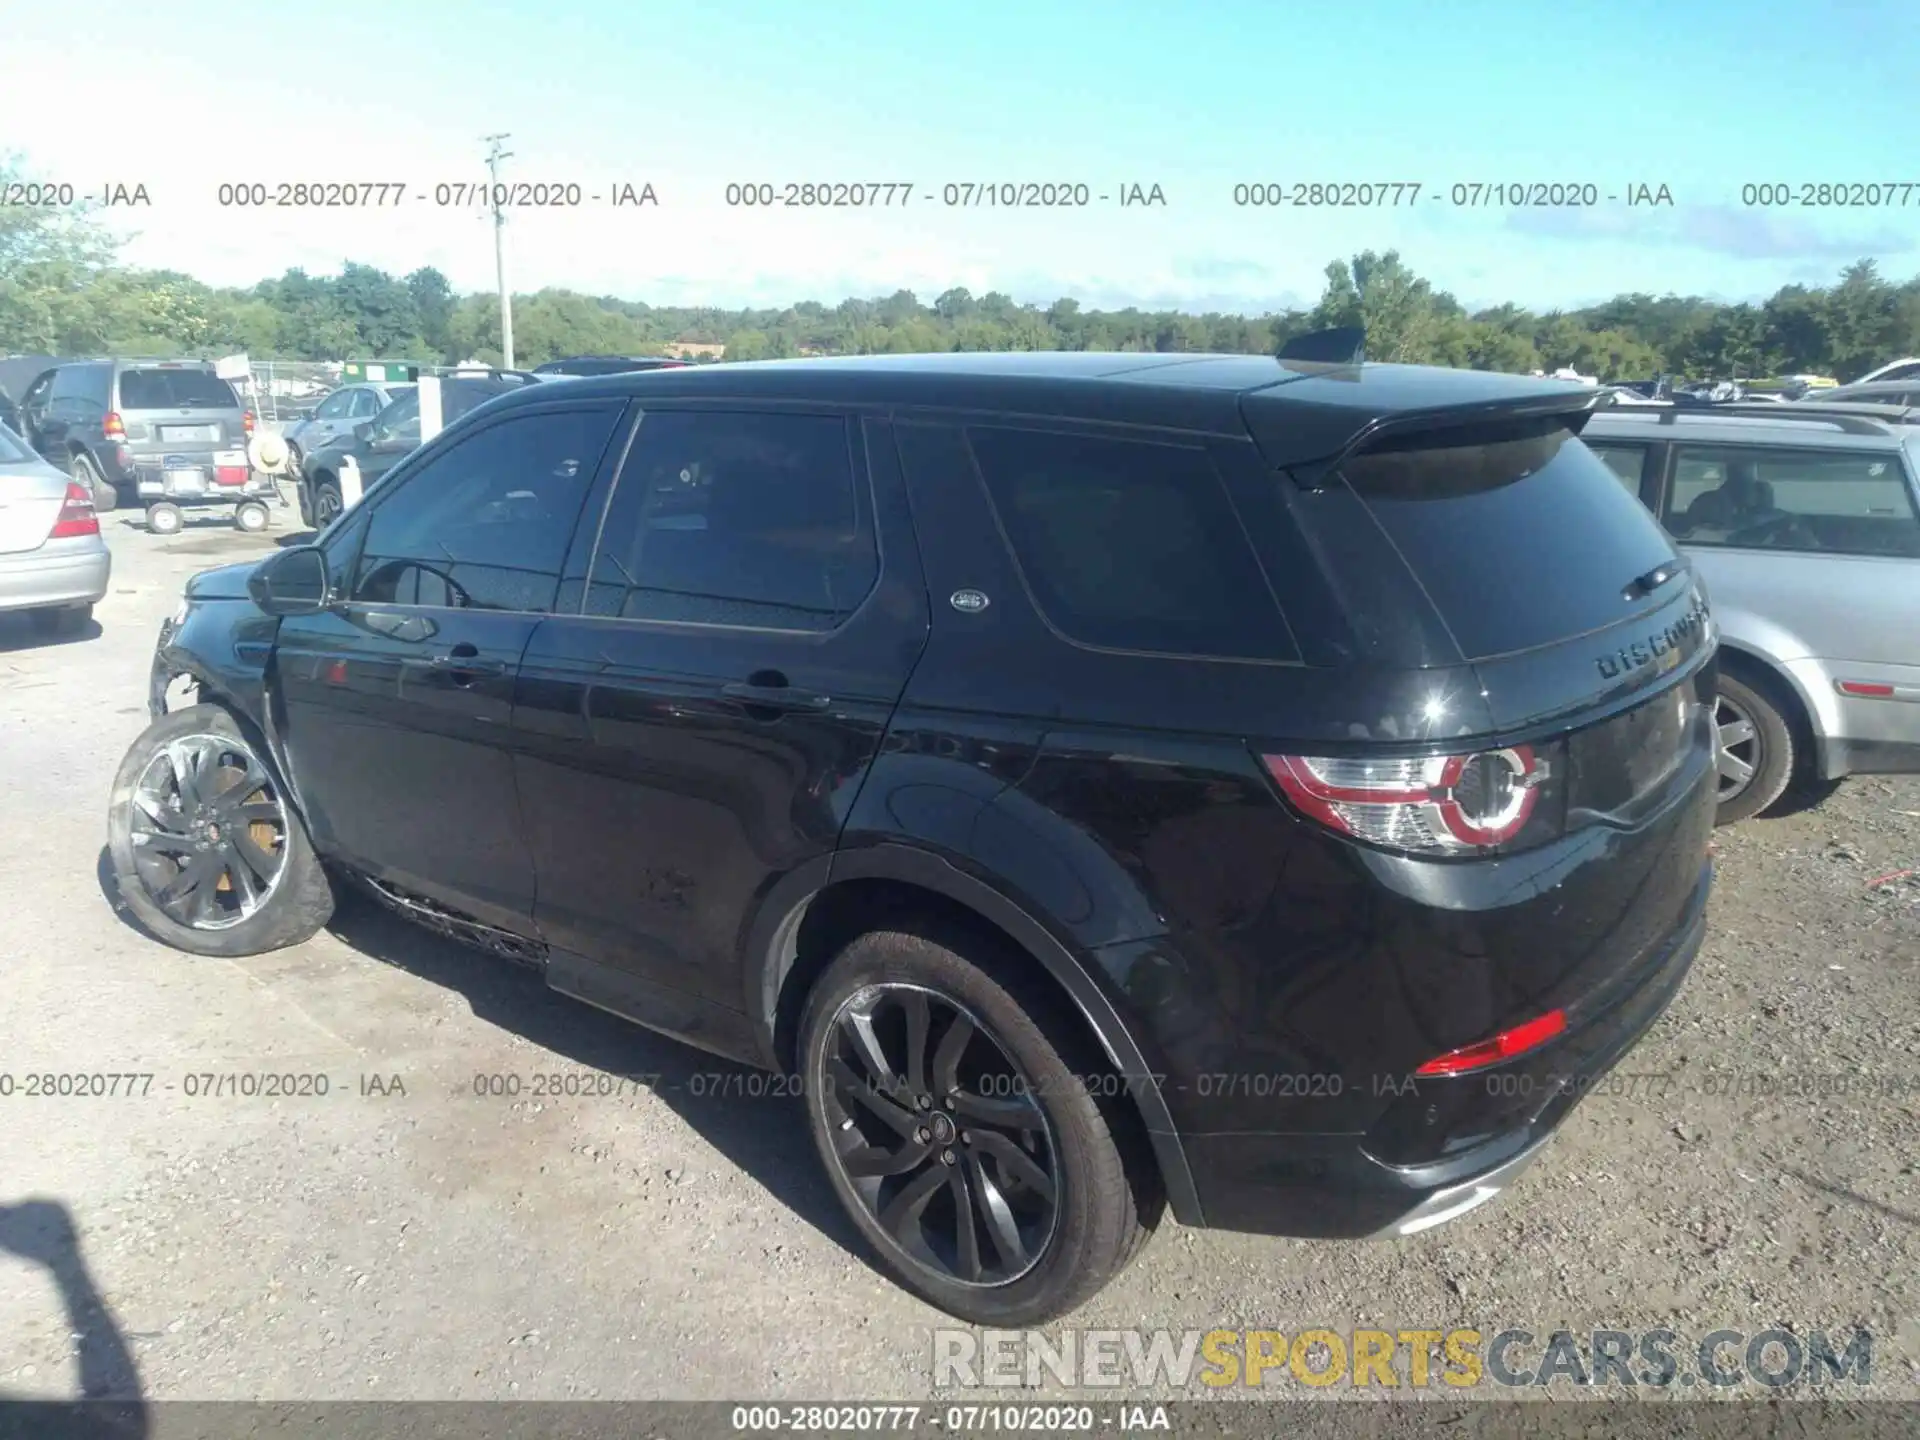 3 Photograph of a damaged car SALCR2GX7KH789617 LAND ROVER DISCOVERY SPORT 2019